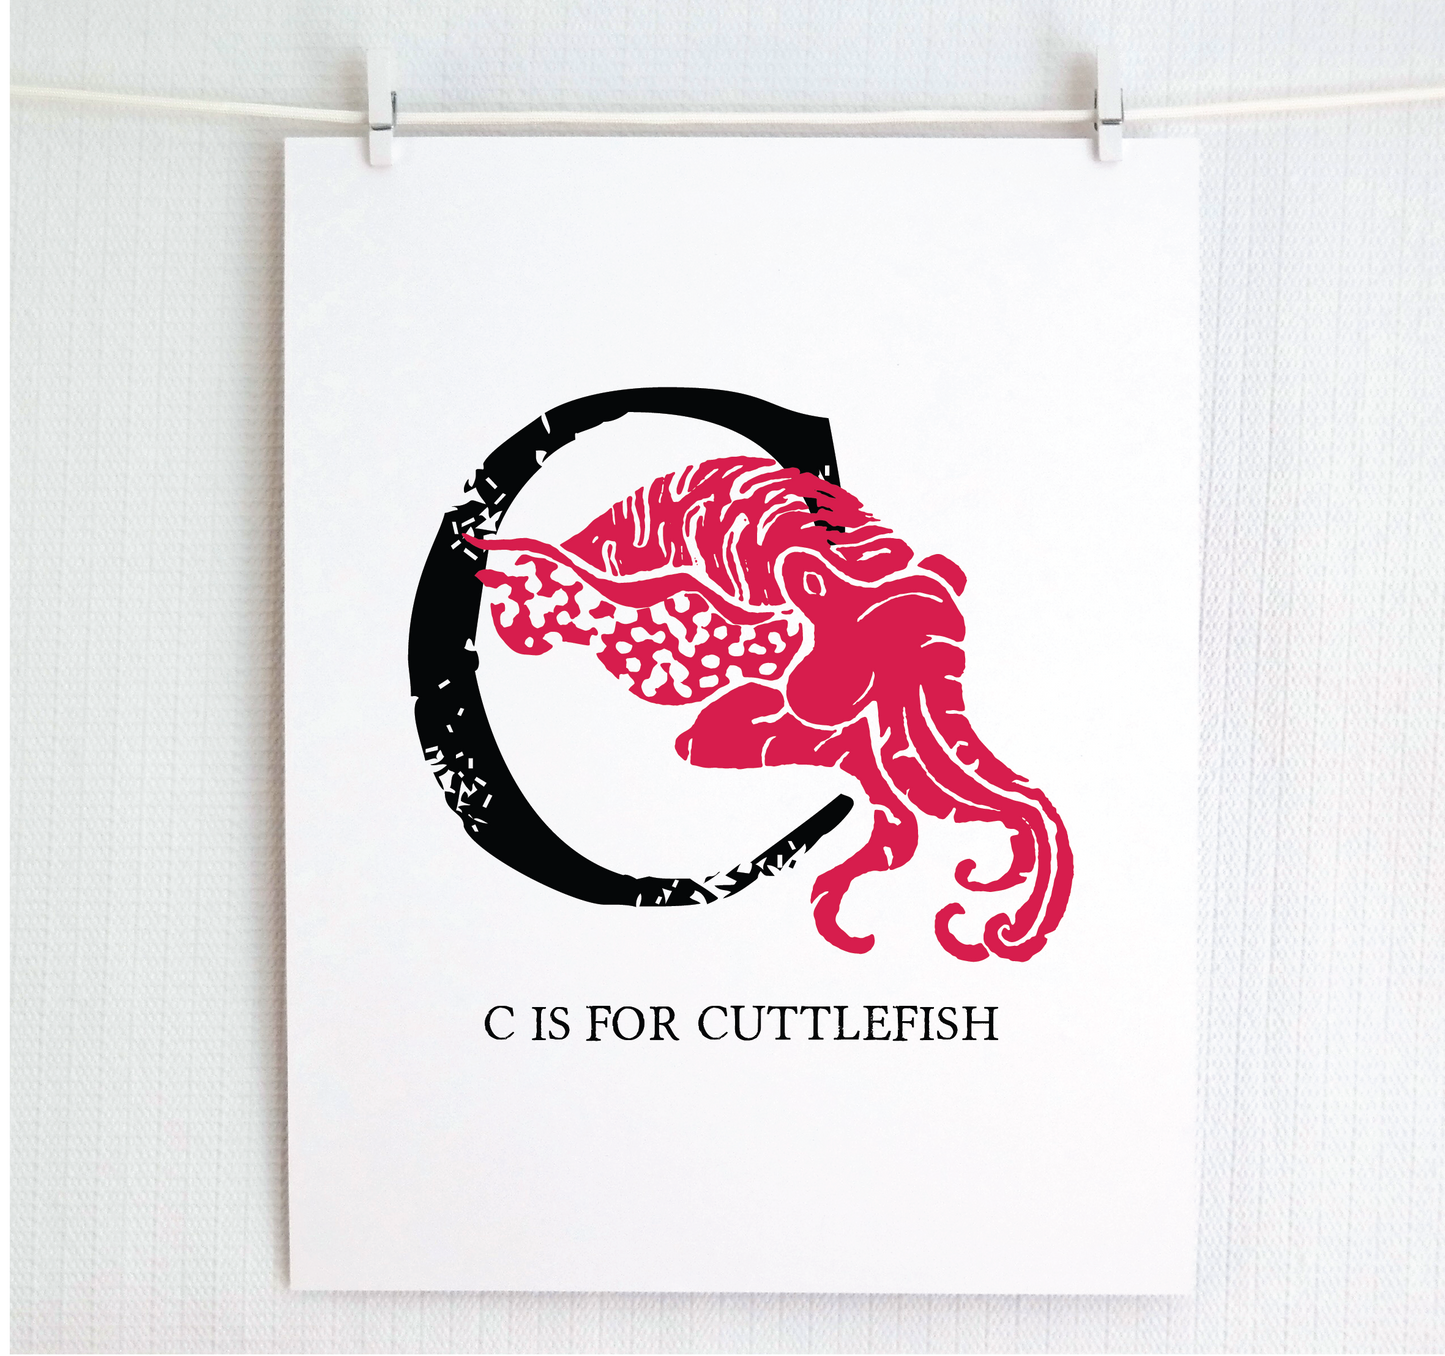 C is for Cuttlefish